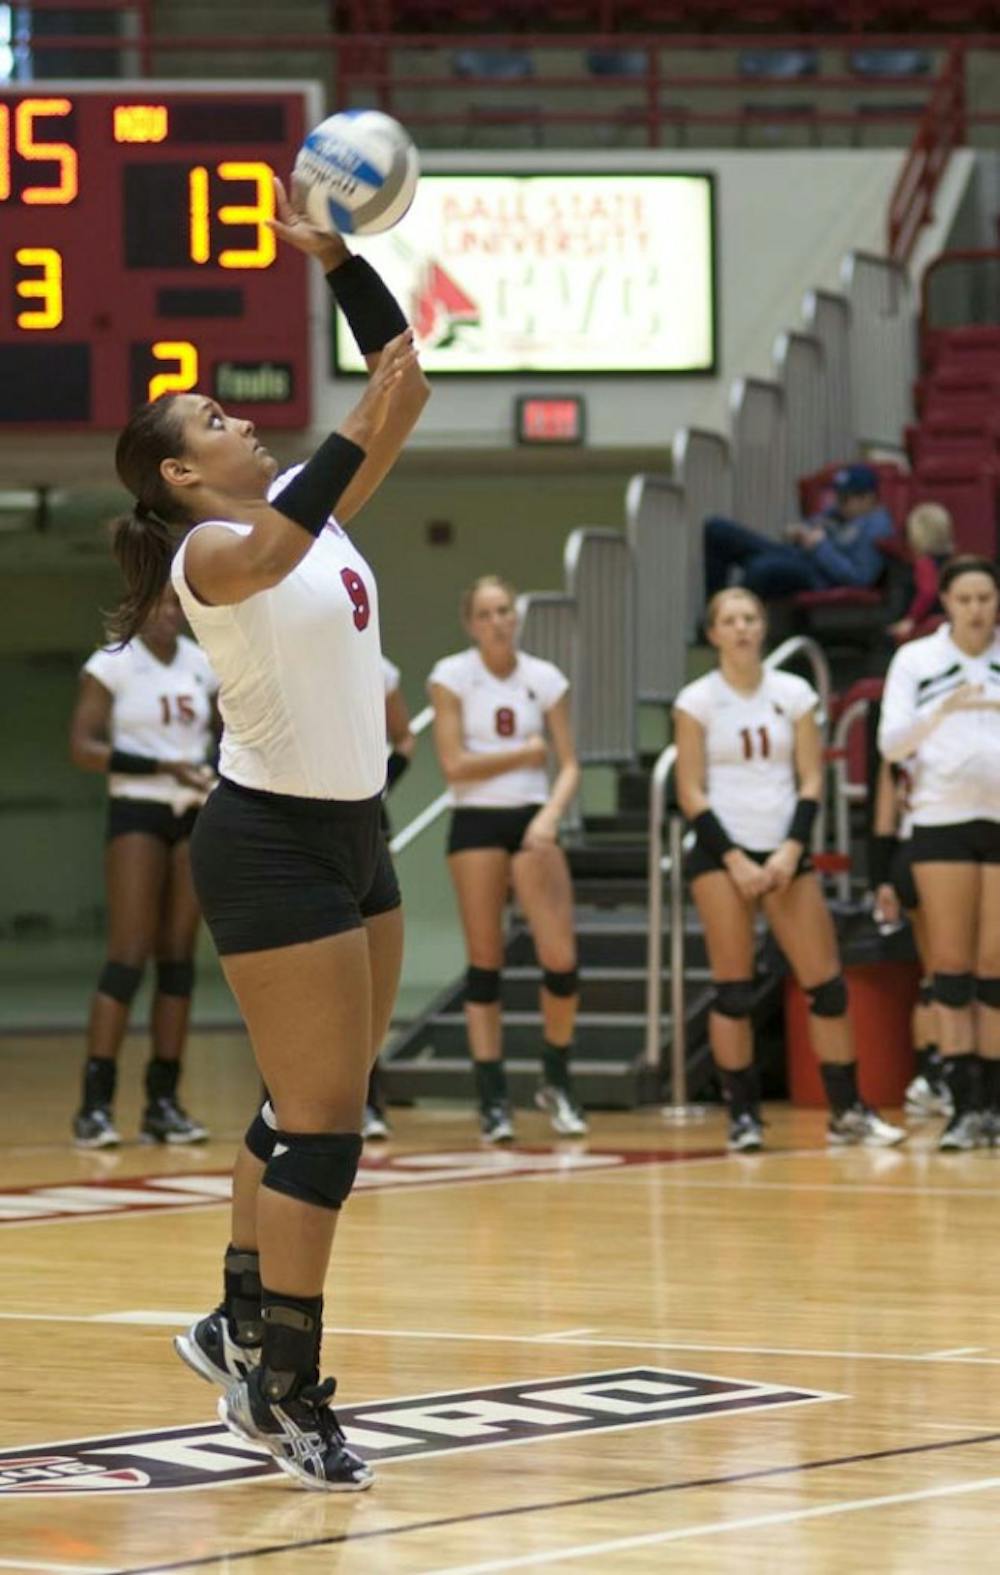 Jaclyn Fullove serves the ball during Sunday’s game against Northern Illinois University. Fullove played in a total of six sets this year compared to her four sets last year. DN PHOTO JONATHAN MIKSANEK